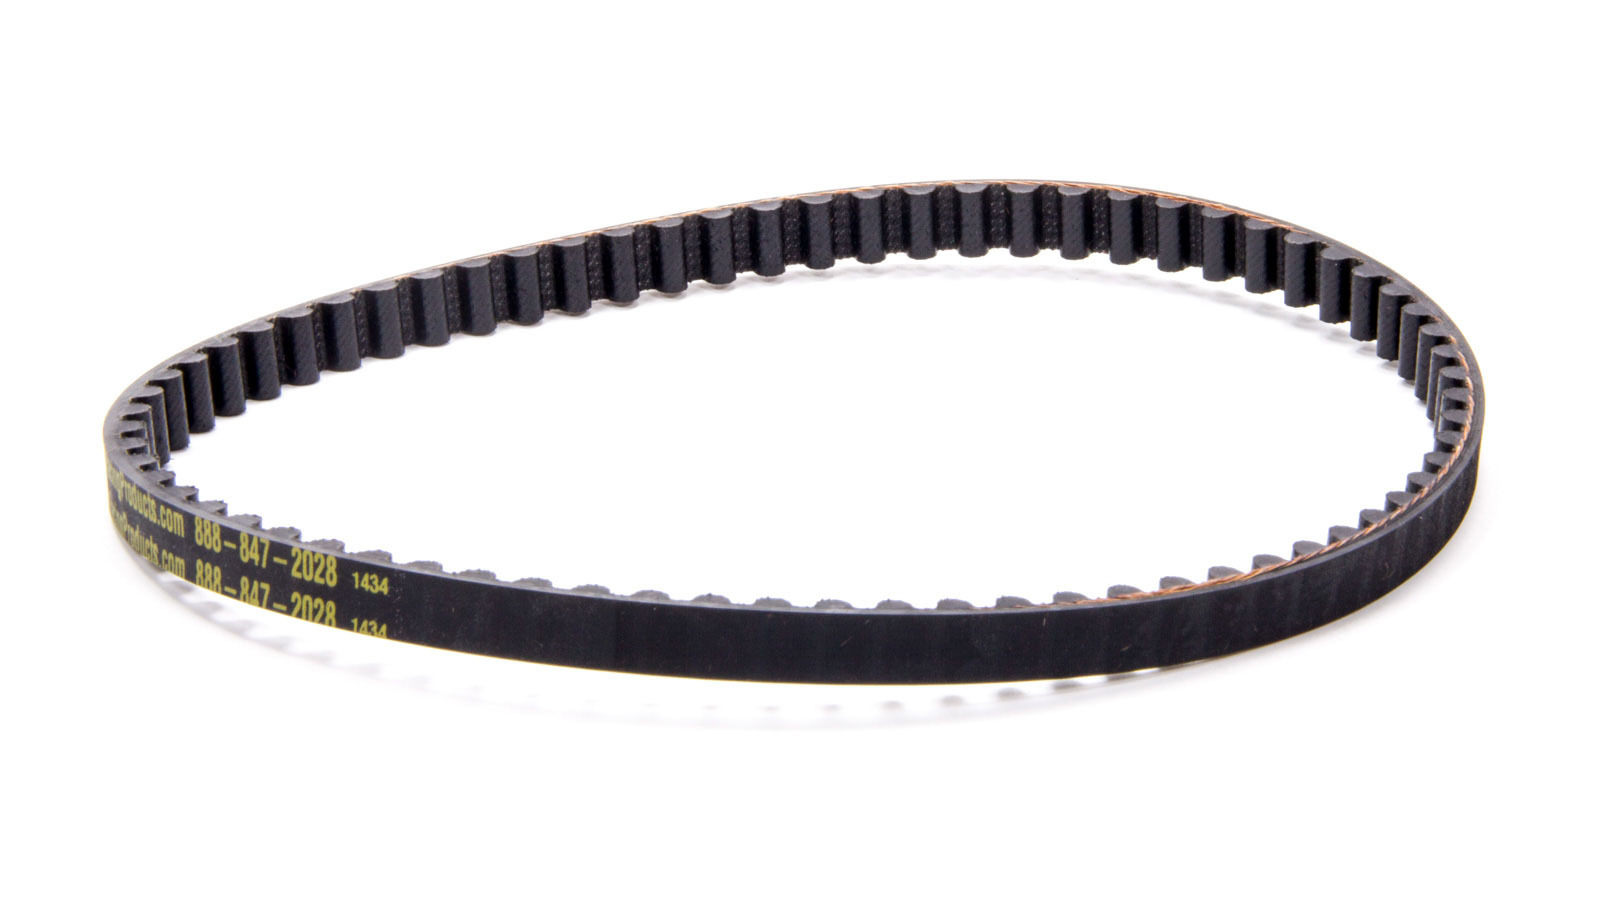 Jones Racing Products 680-10HD HTD Drive Belt, 26.770 in Long, 10 mm Wide, 8 mm Pitch, Each